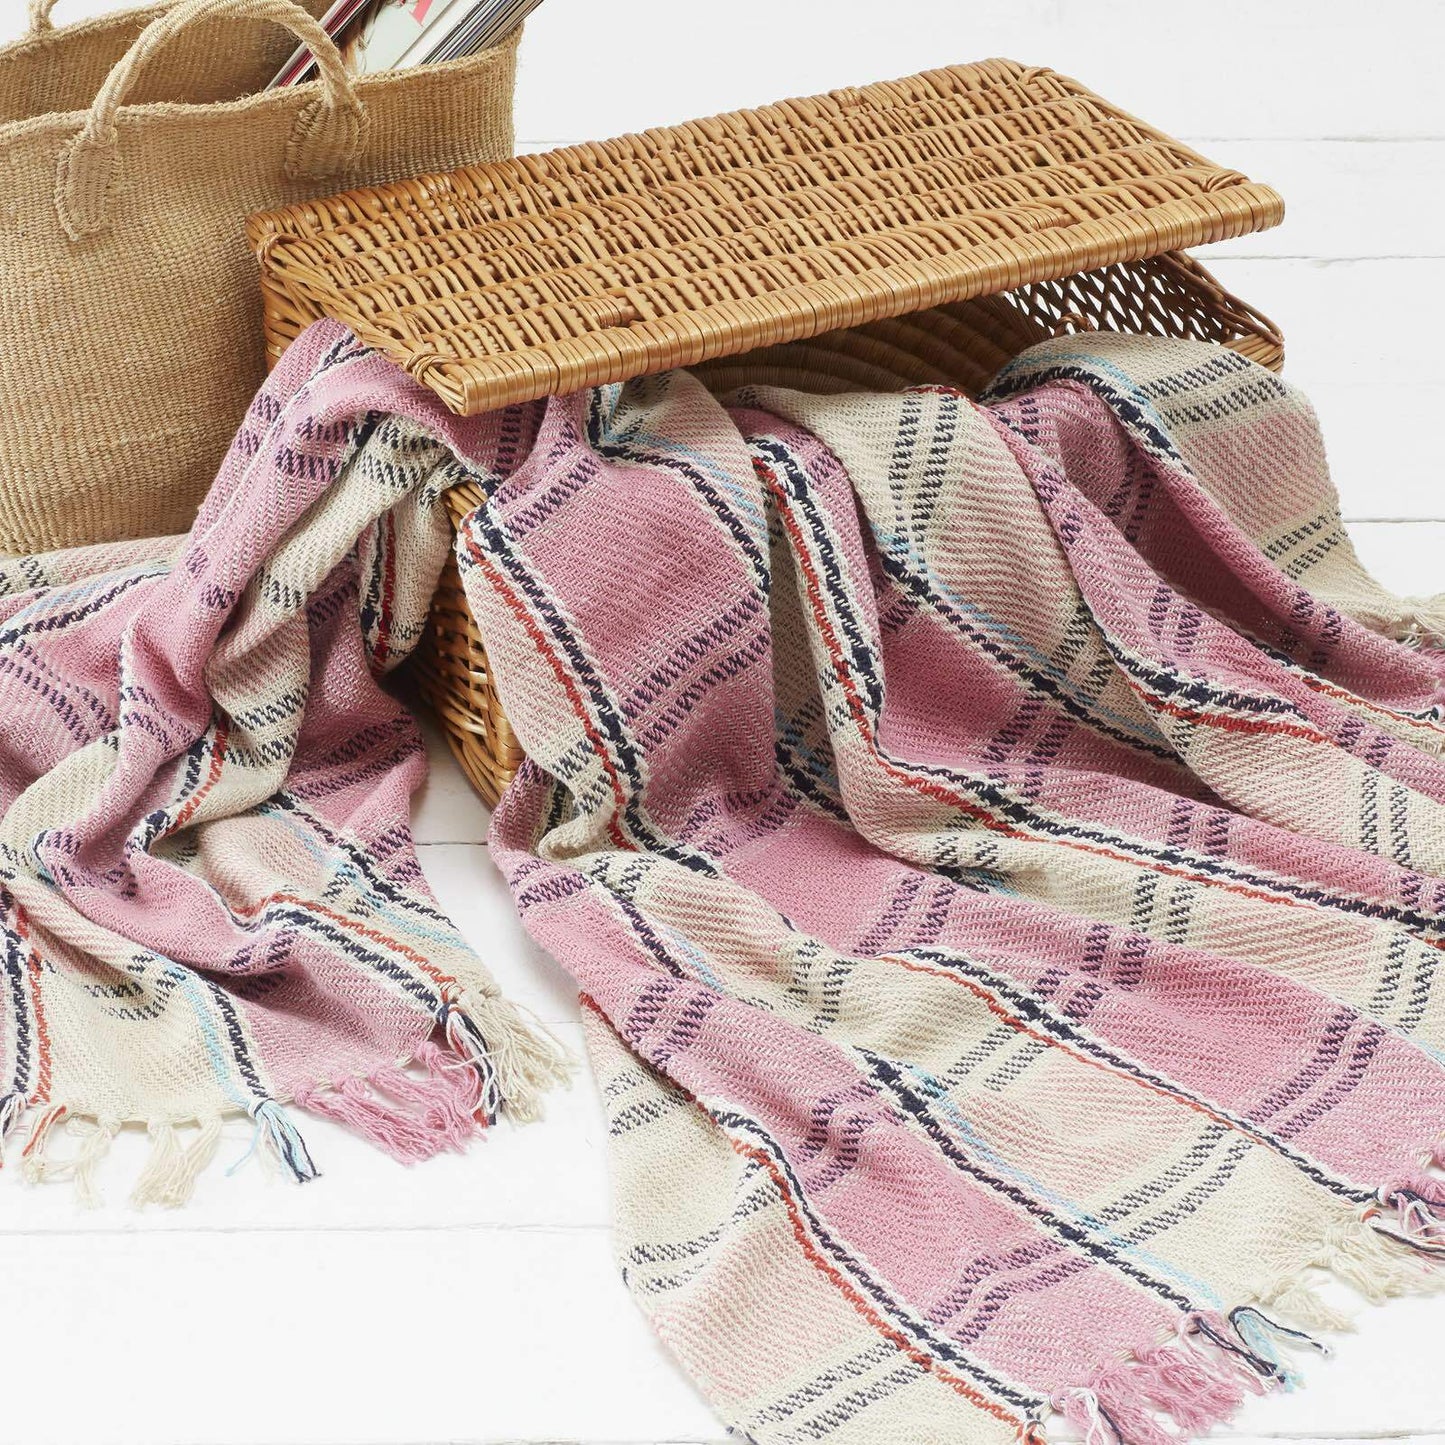 Recycled Picnic Blanket 100% Cotton